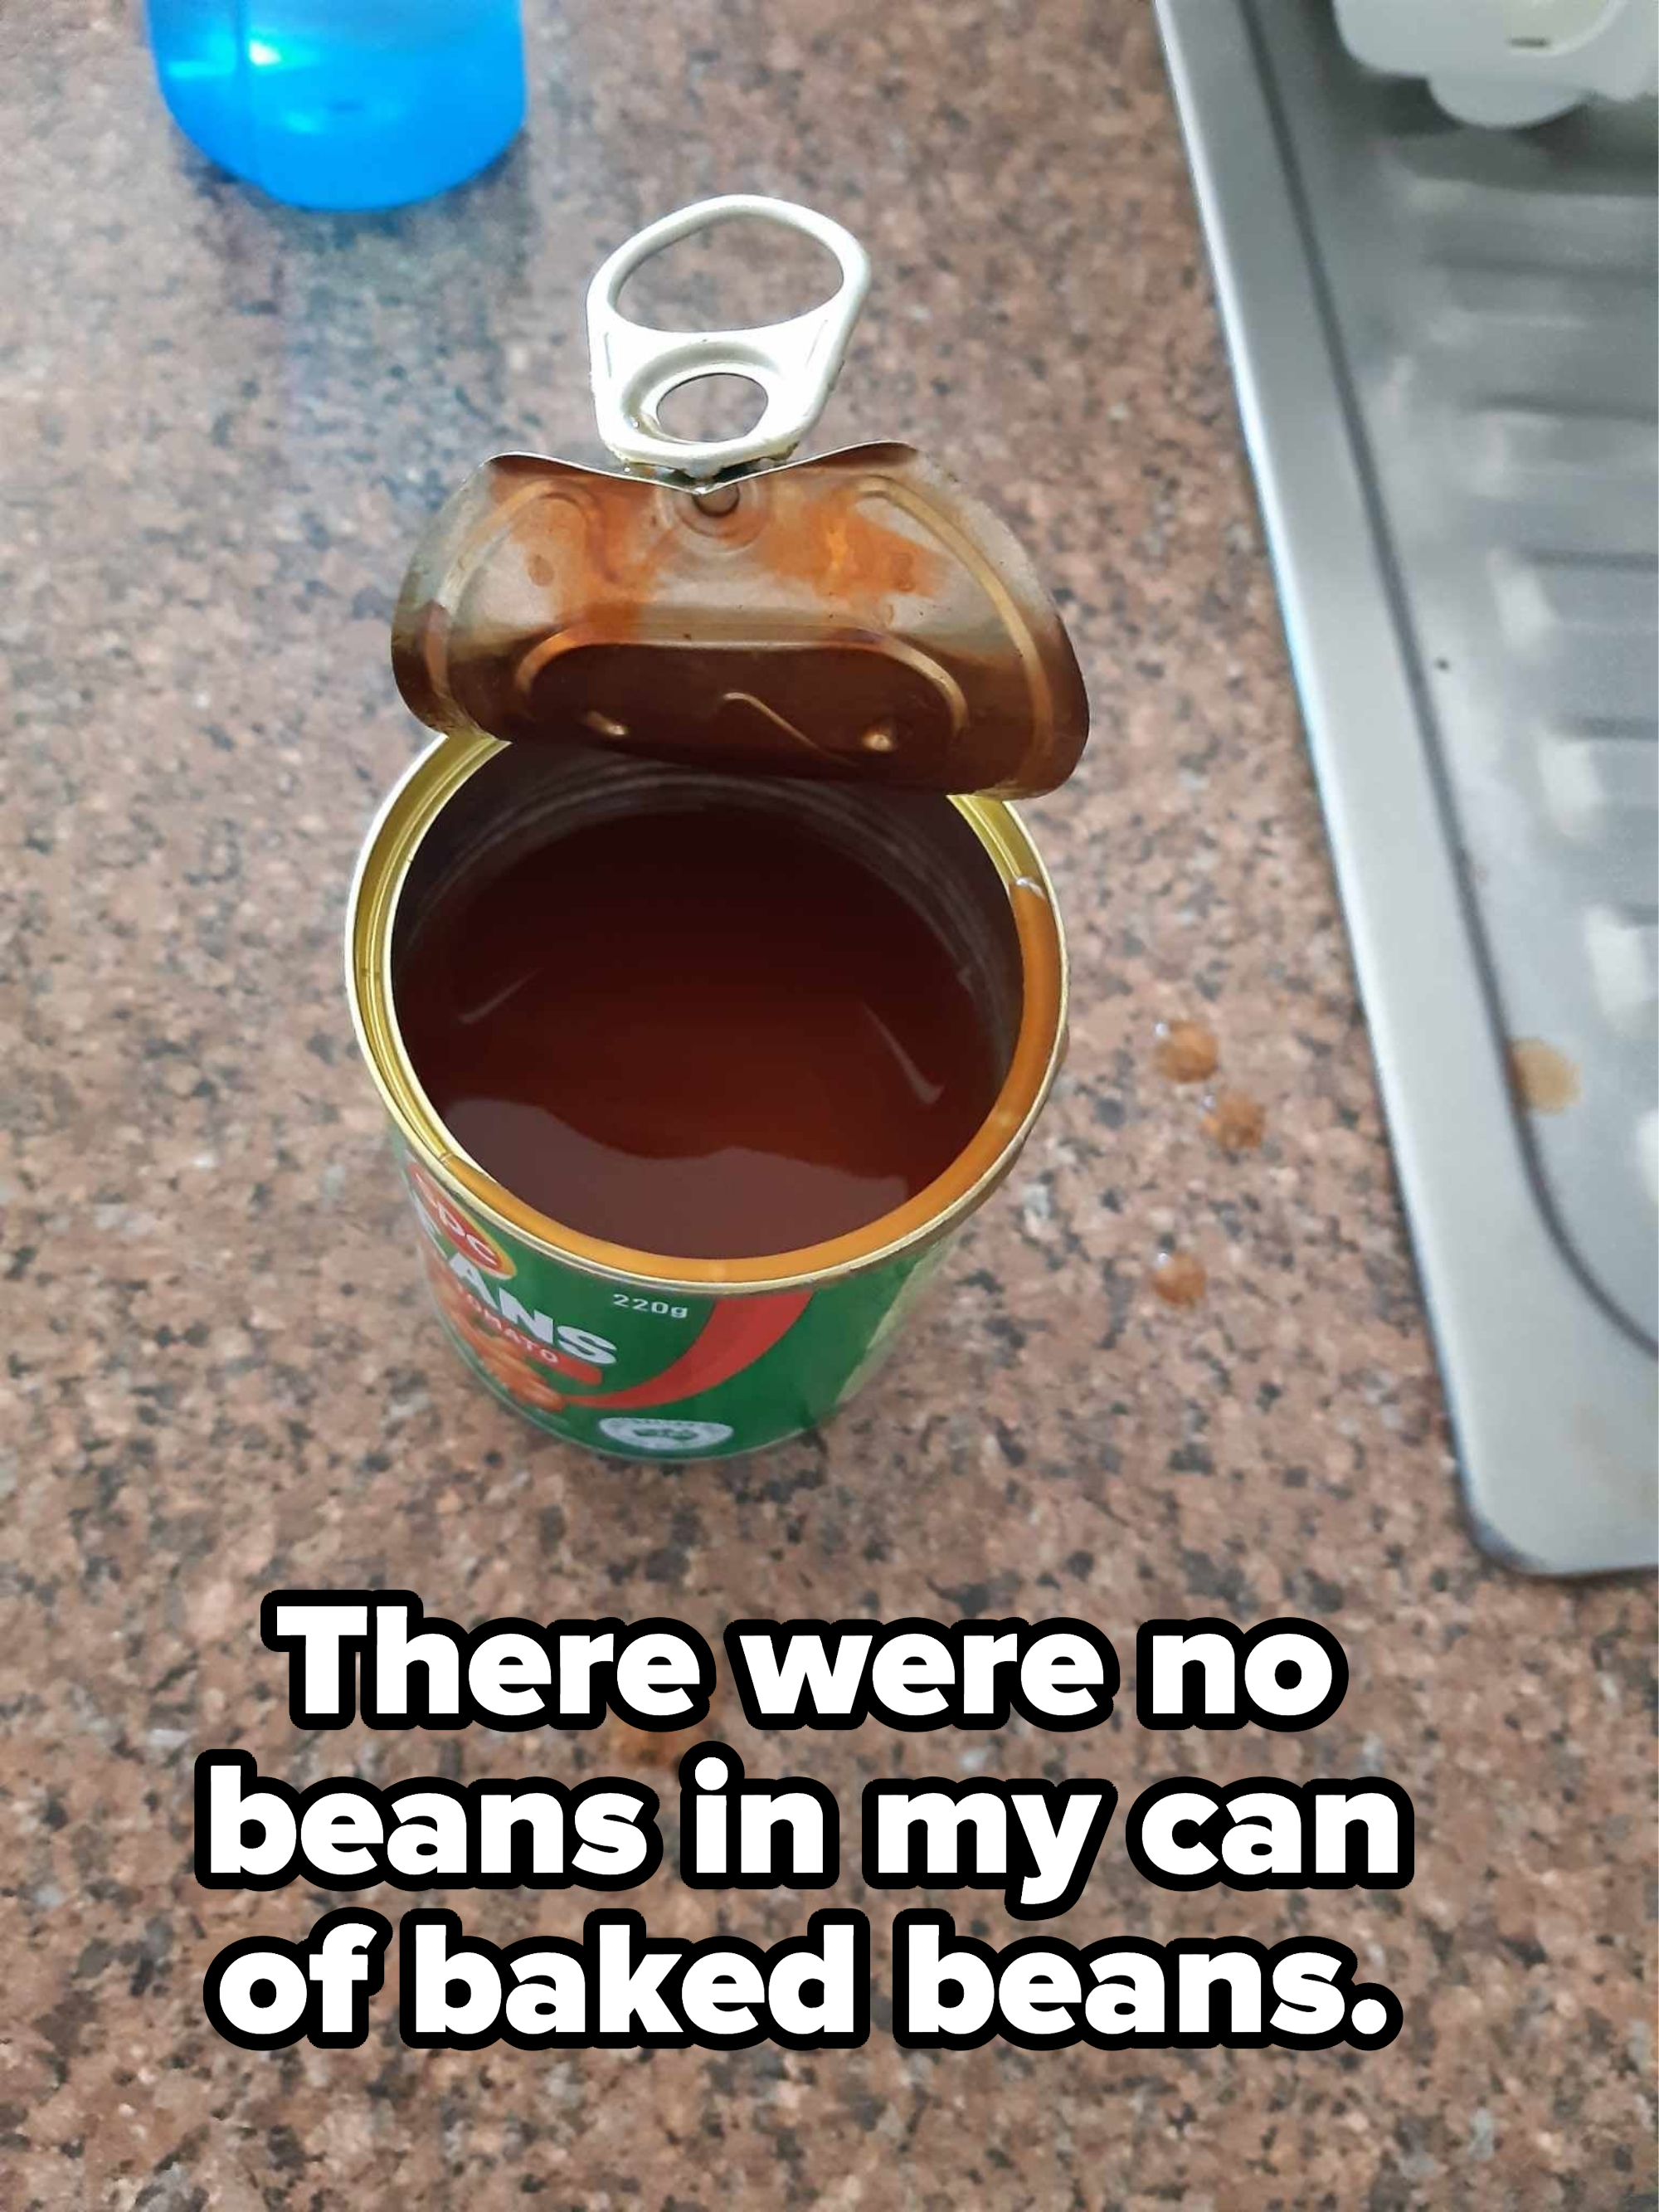 Overhead view of an open can with liquid in it, with caption &quot;There were no beans in my can of baked beans&quot;